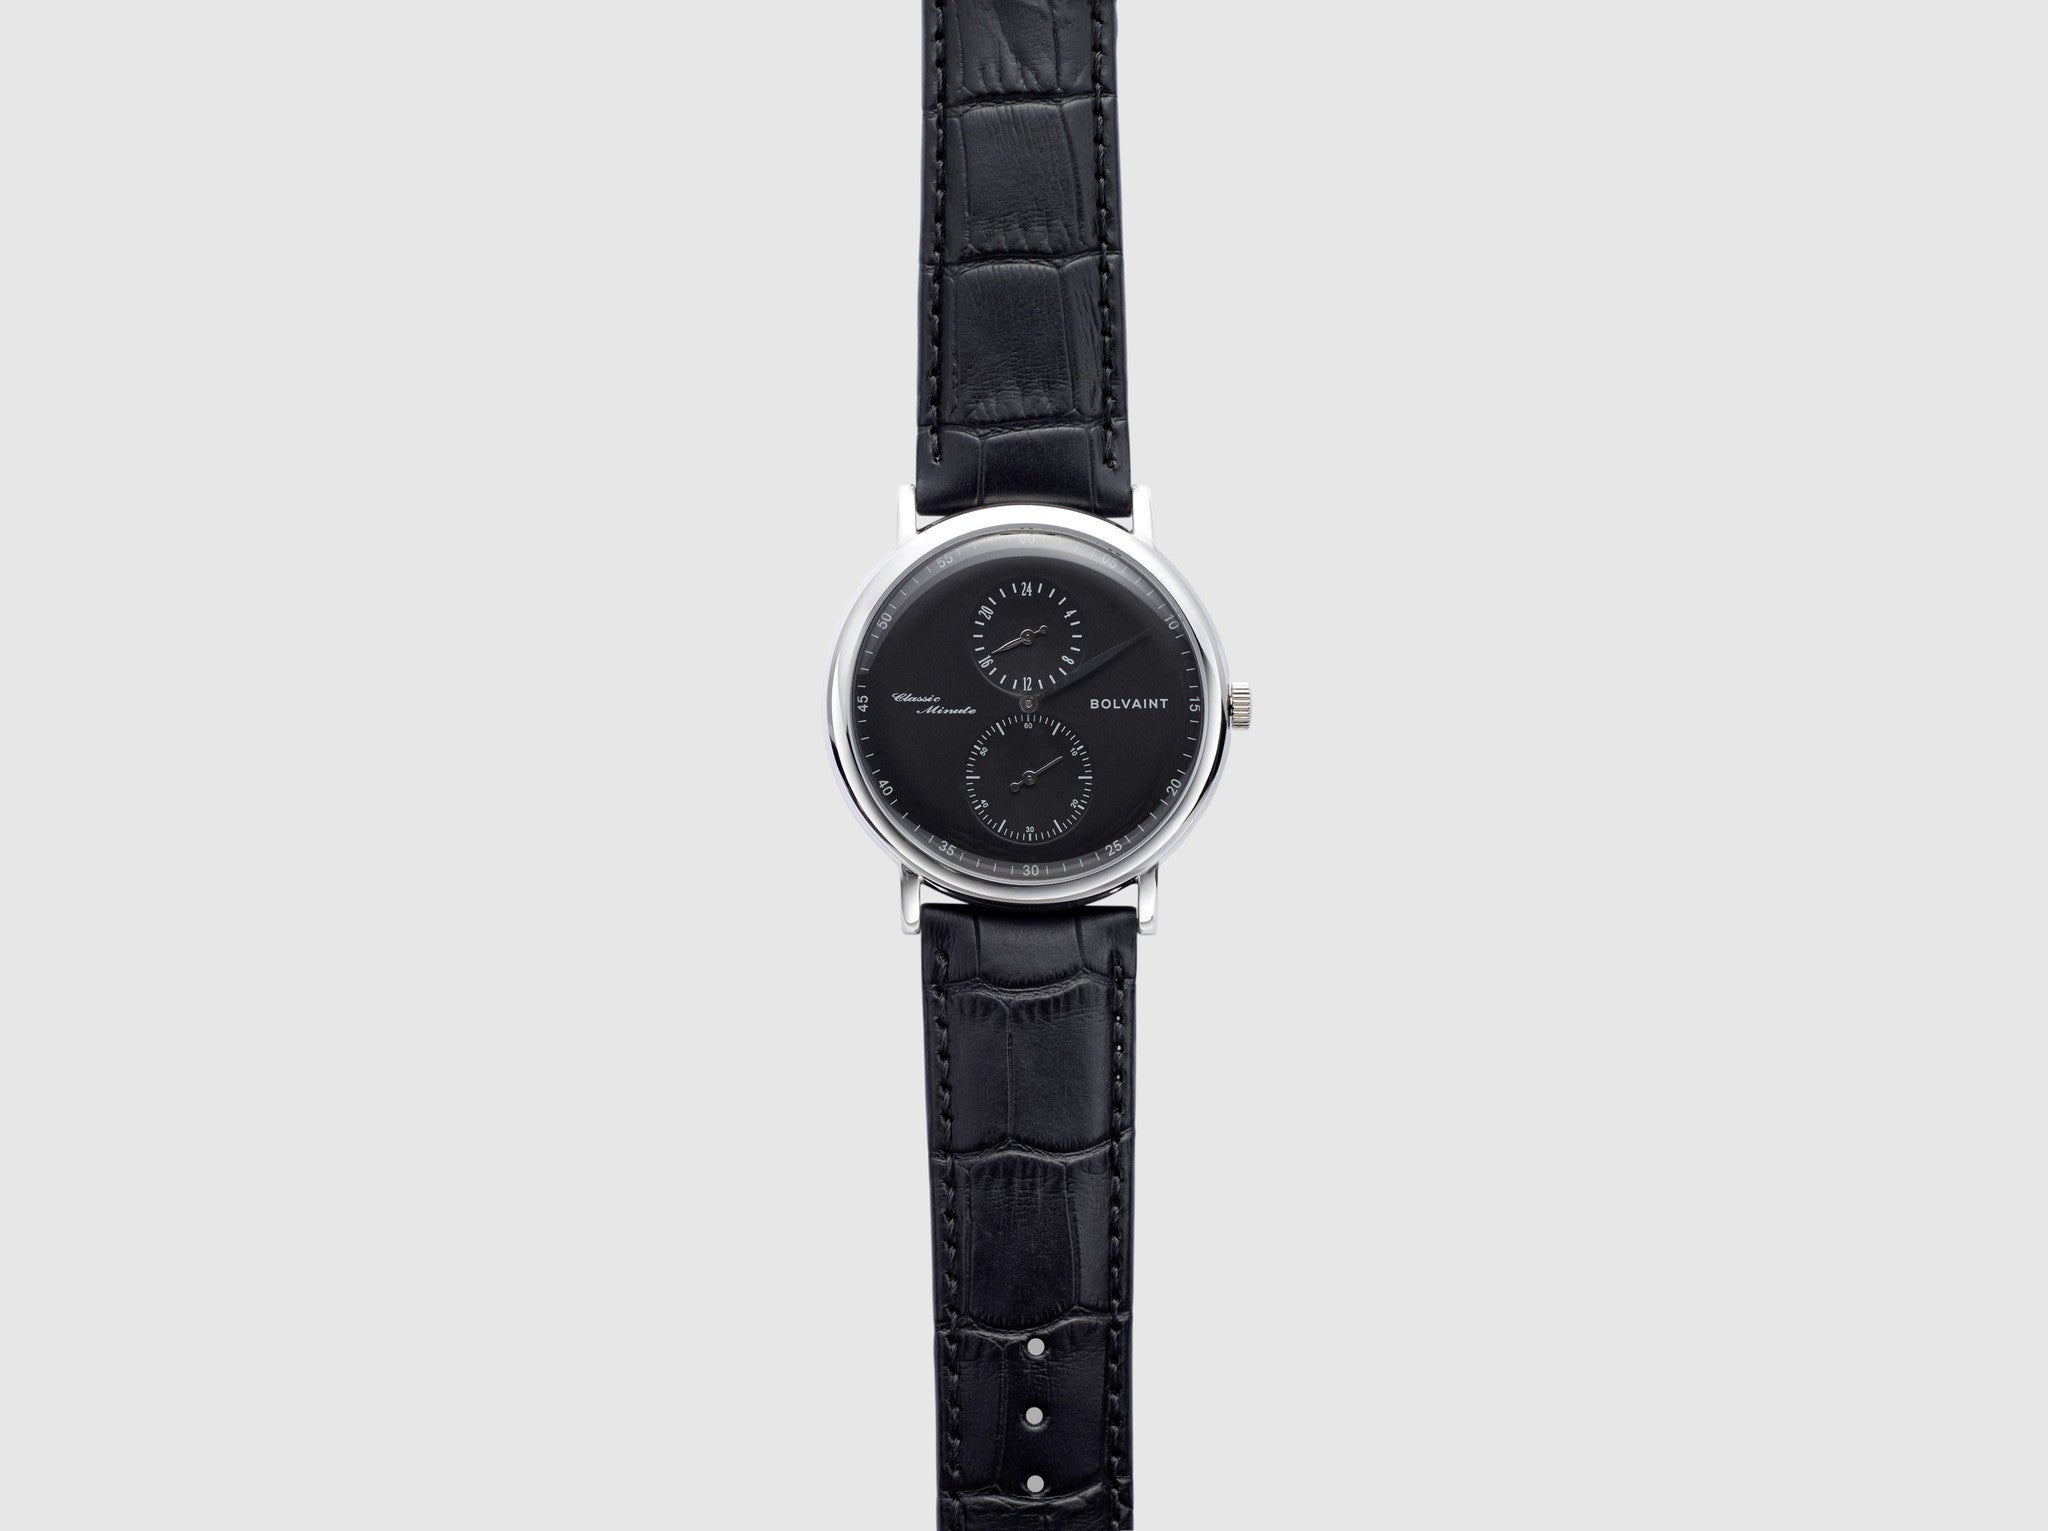 The Eanes Classic Minute in Black